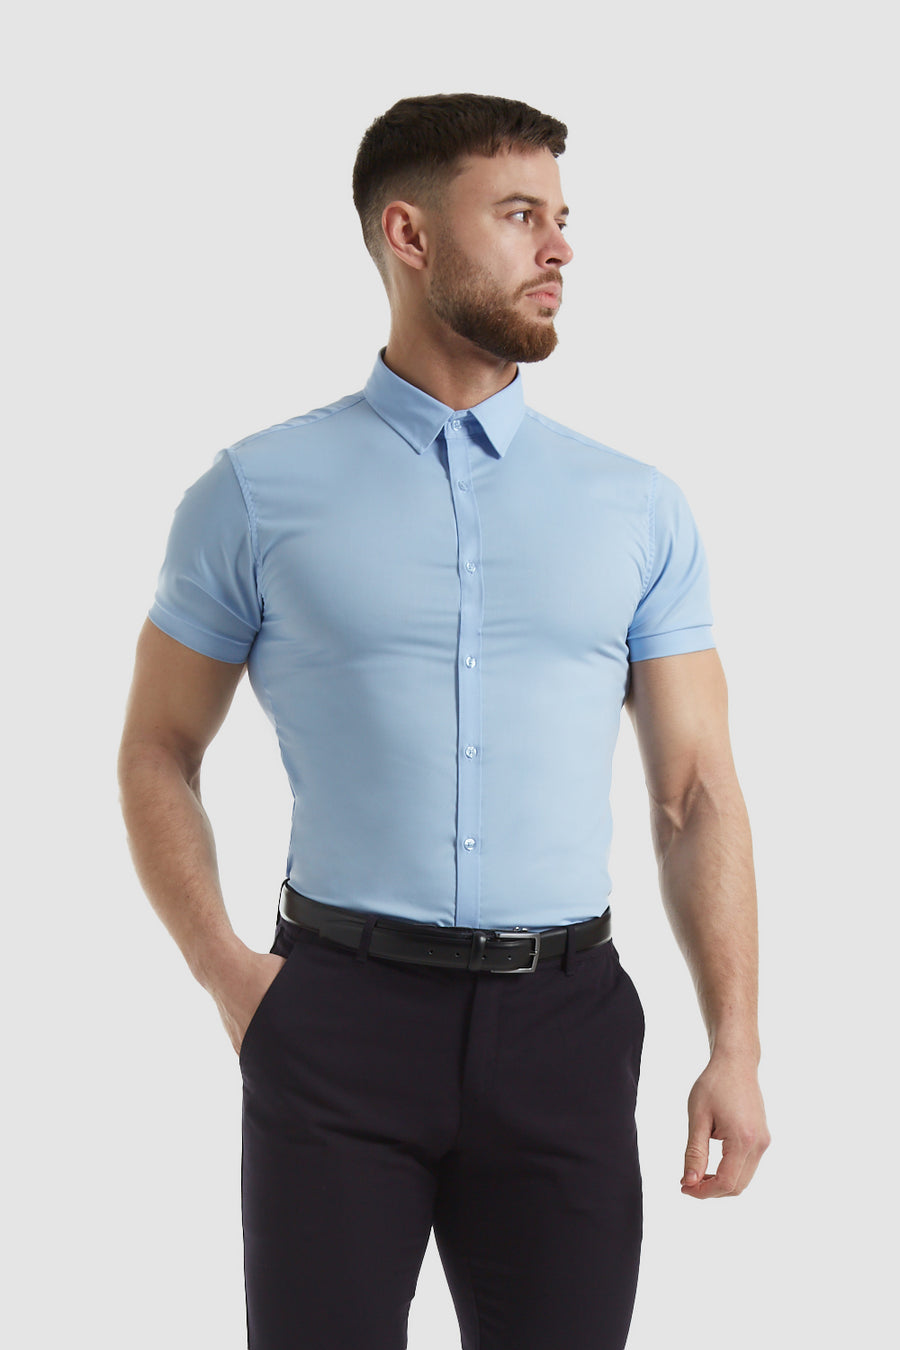 Athletic Fit Dress Shirt (SS) in Light Blue - TAILORED ATHLETE - USA